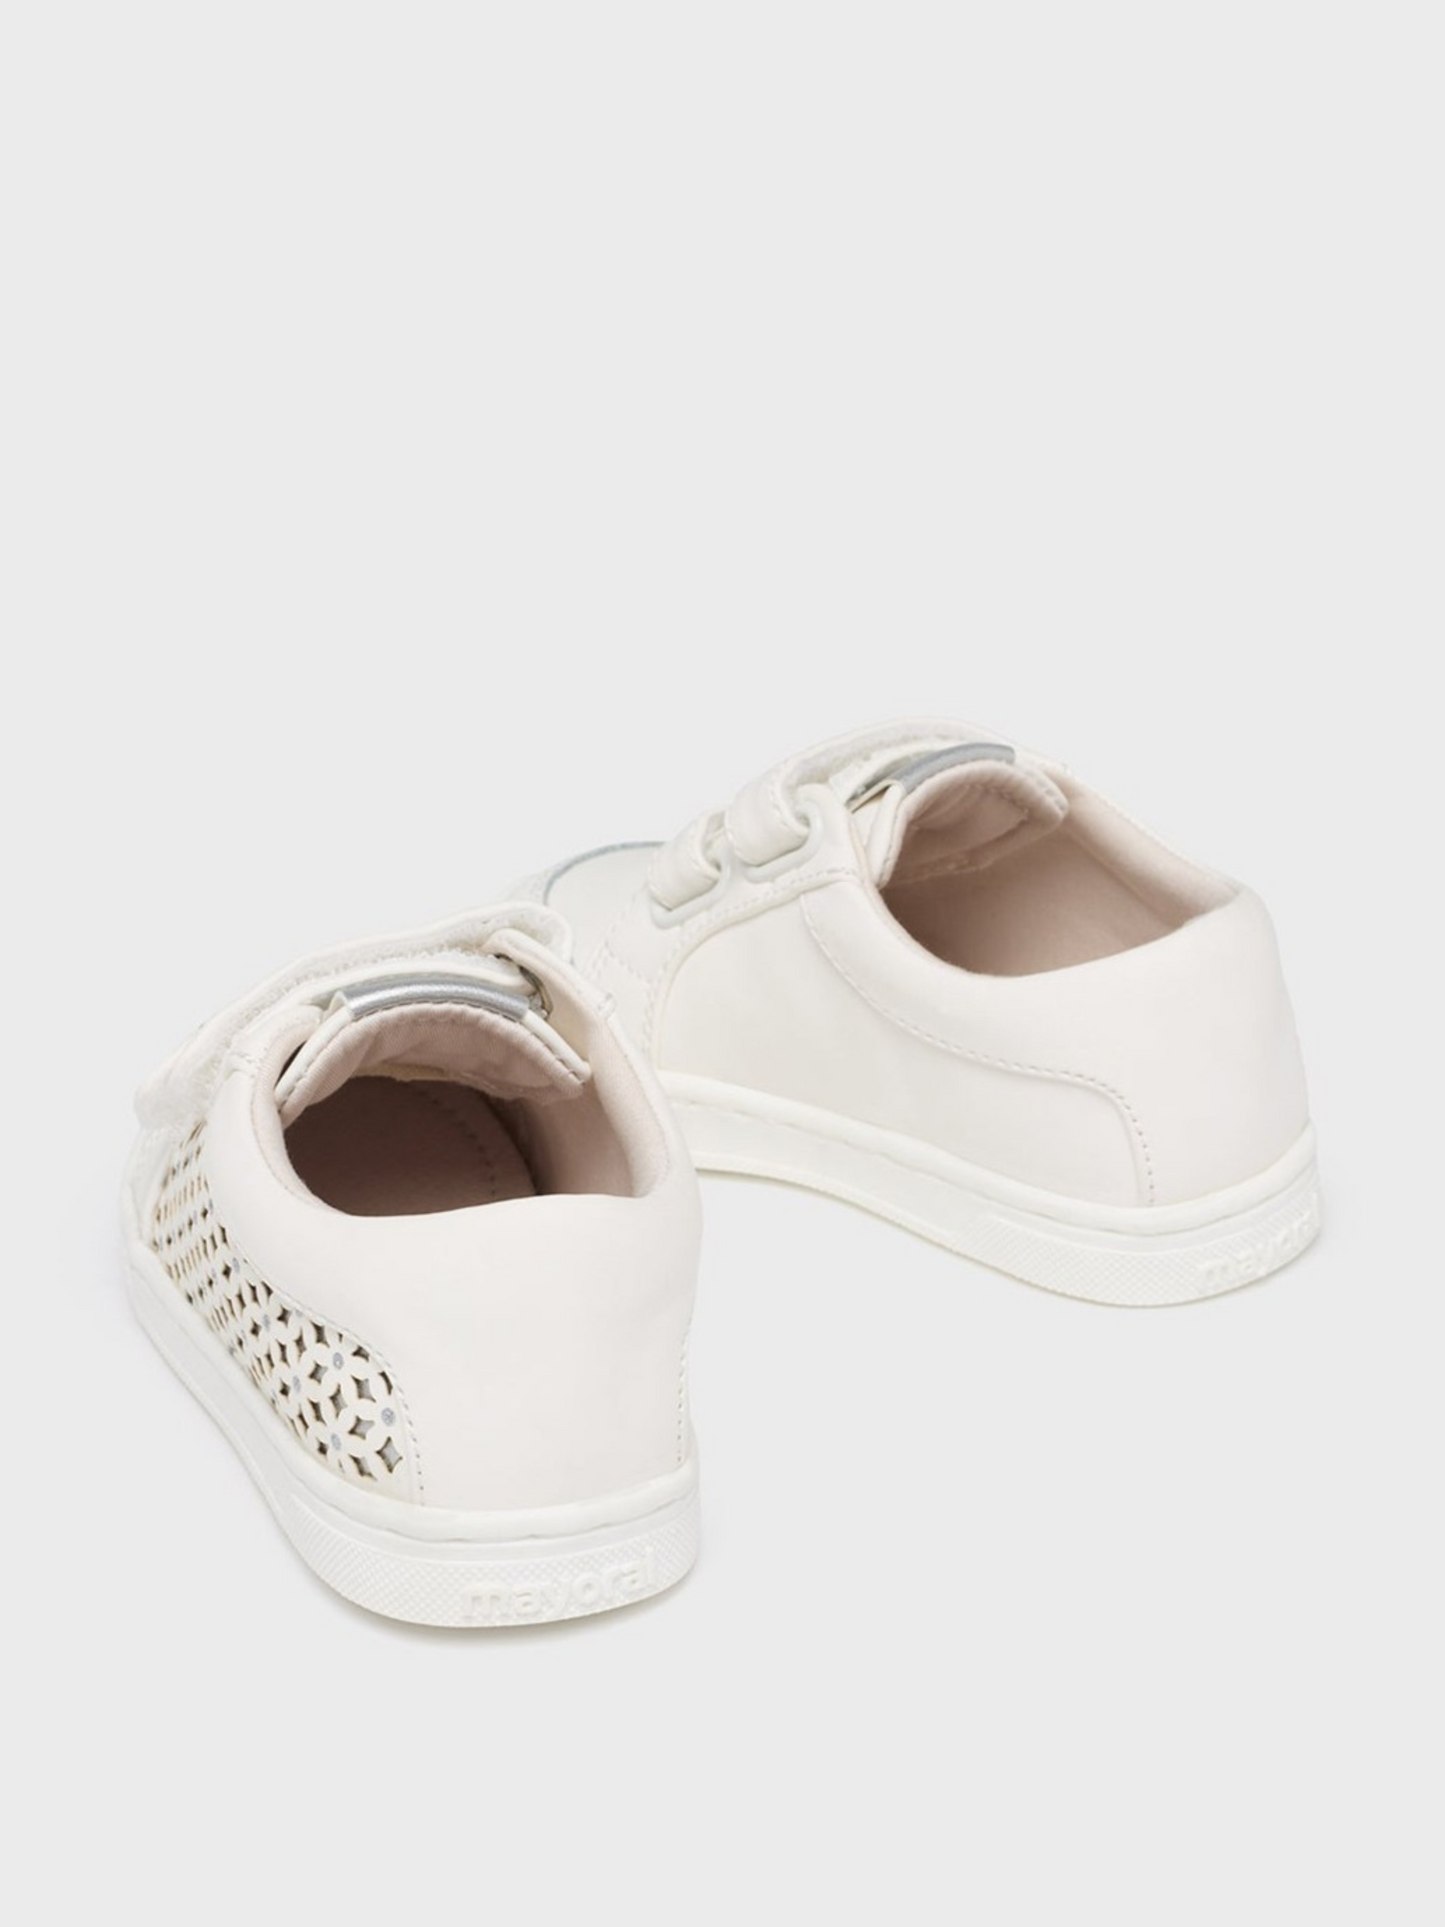 Mayoral Baby Sneakers w/Metallic Accents White_41428-050